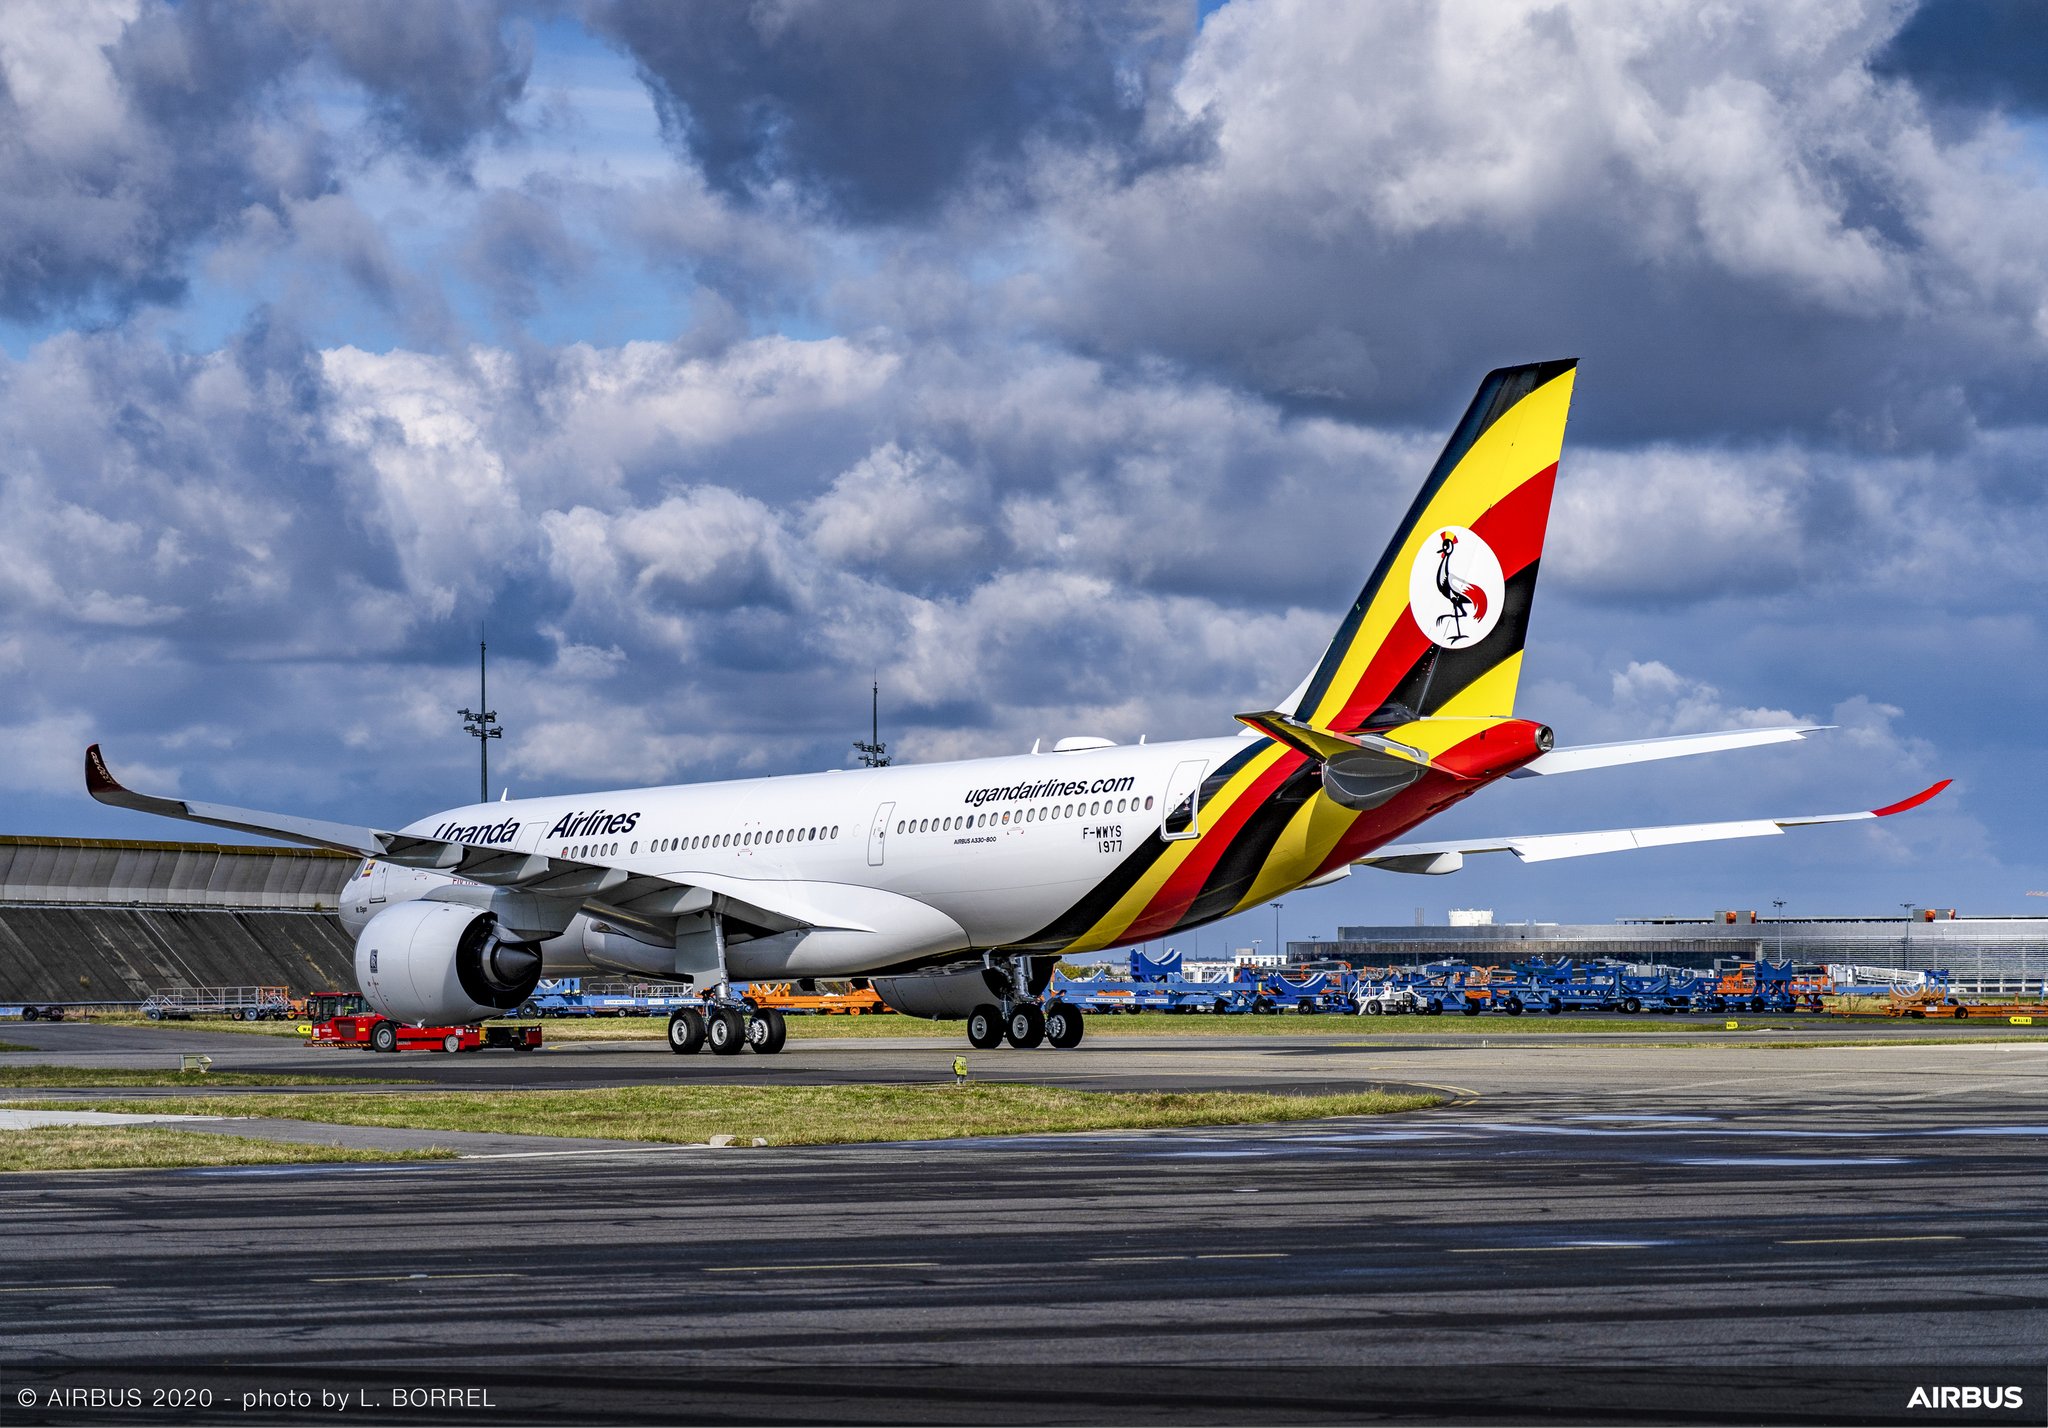 1st A330-800 for Uganda Airlines painted